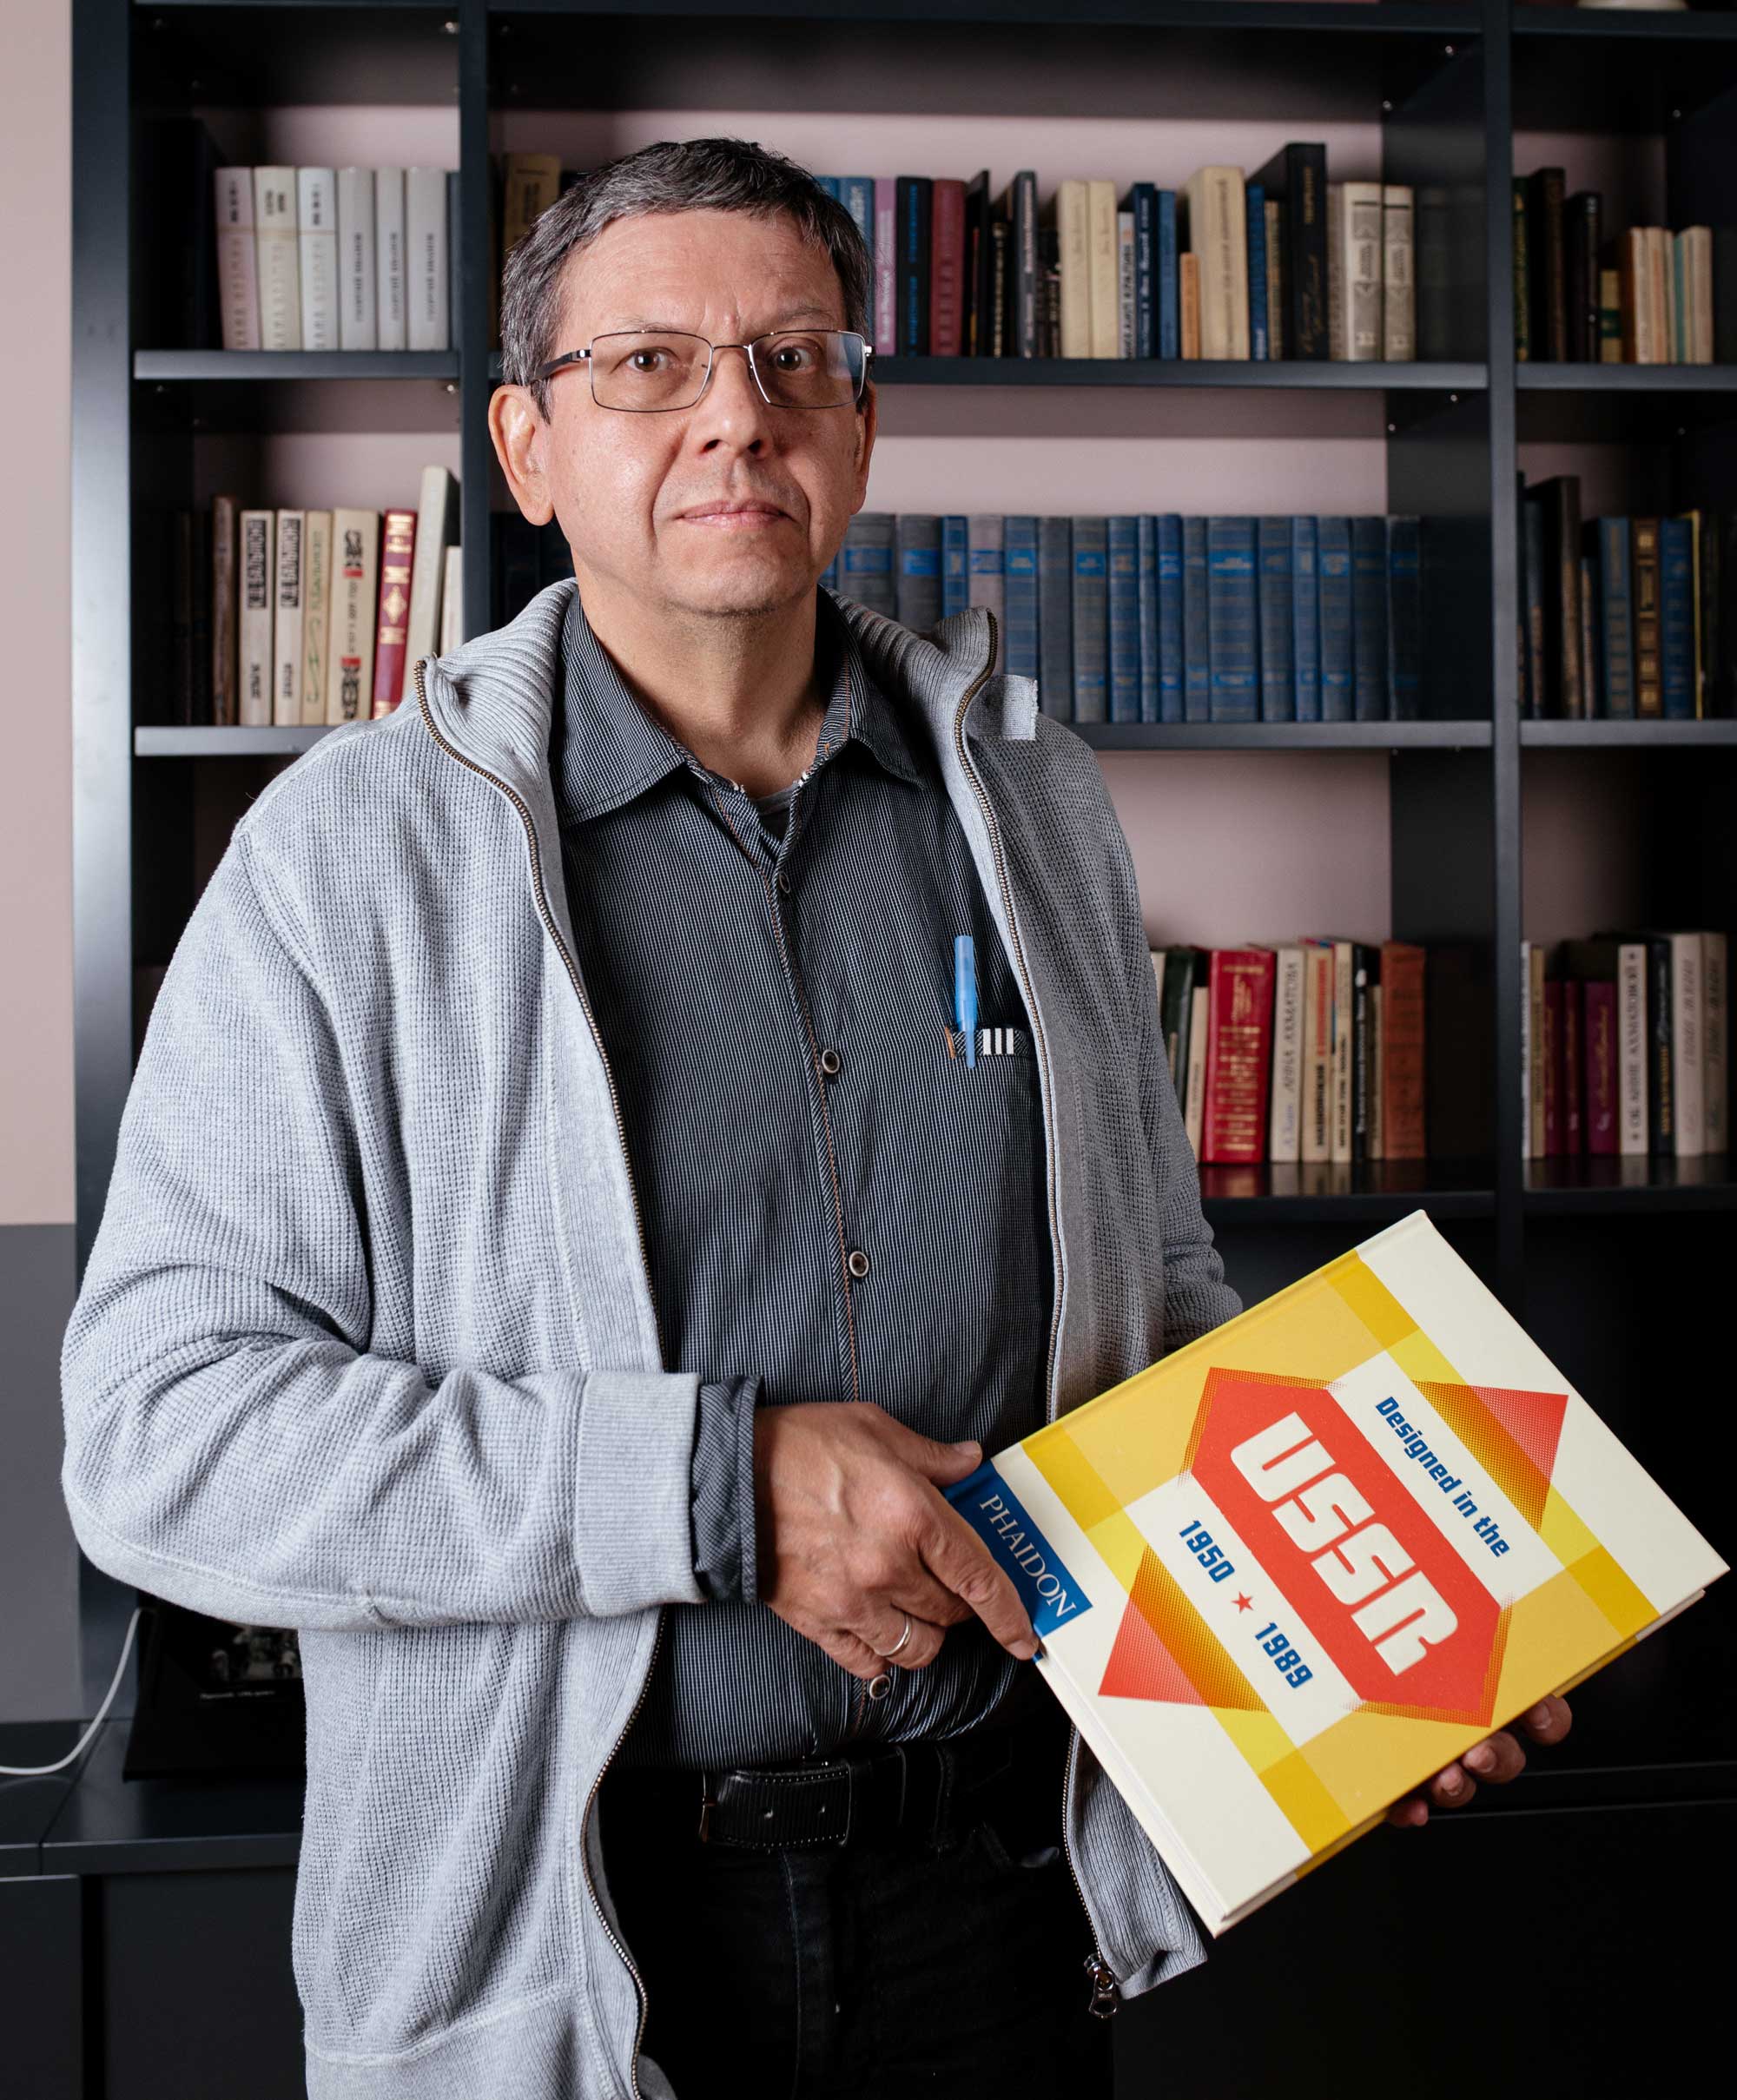 Alexander Lavrentyev, one of the designers featured in Designed in the USSR: 1950-1989 holding a copy of the book photographed at the Tretiakov Gallery in Moscow last month